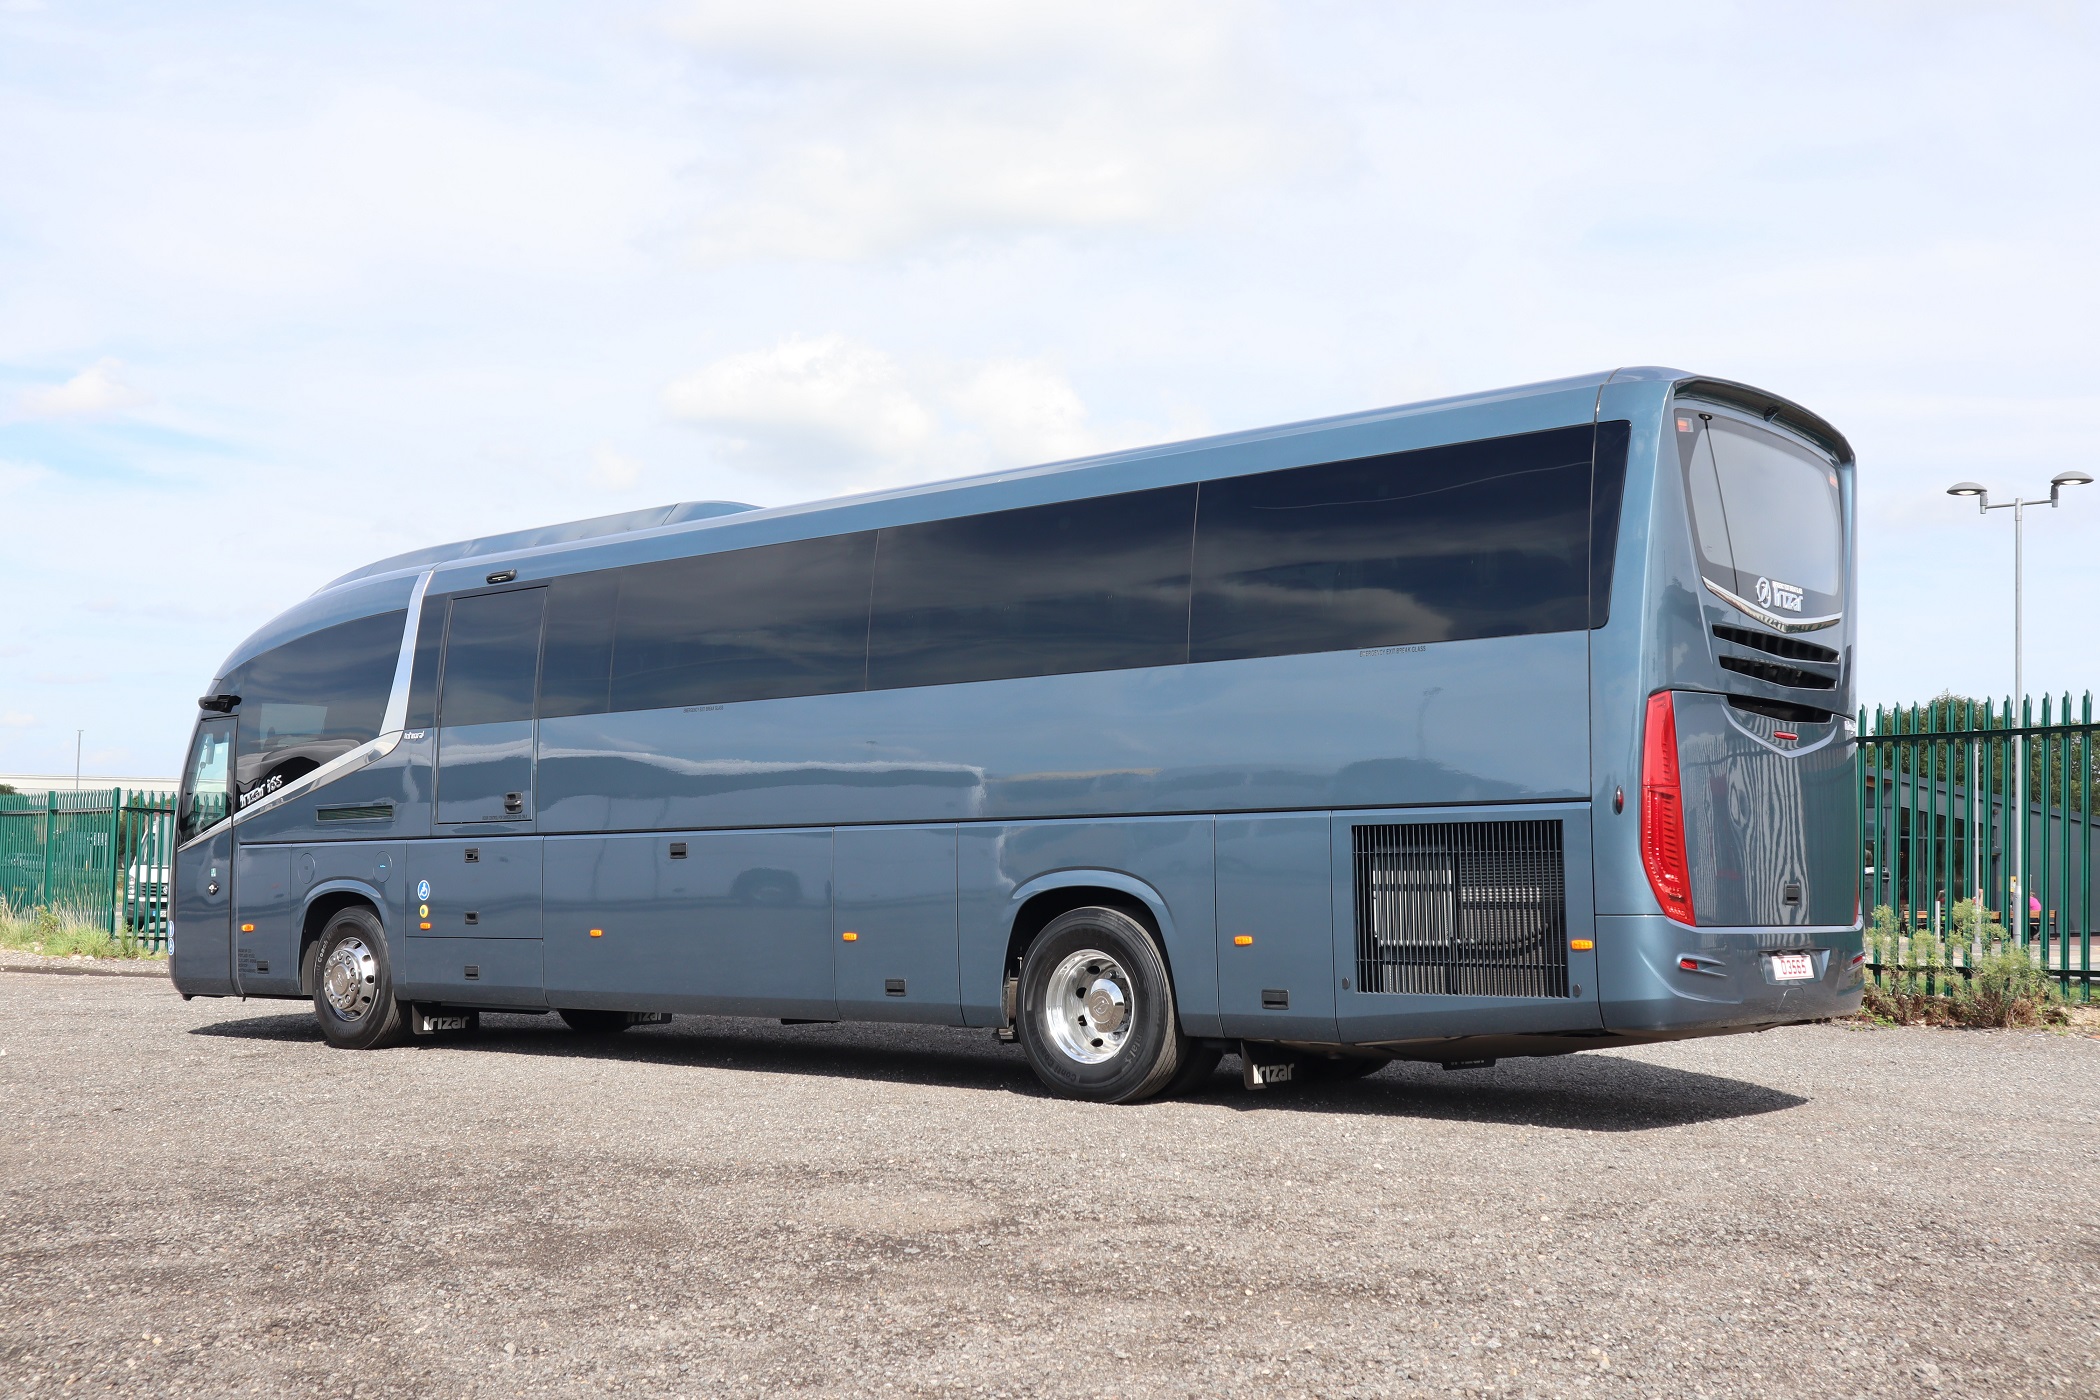 Rear view of coach from nearside